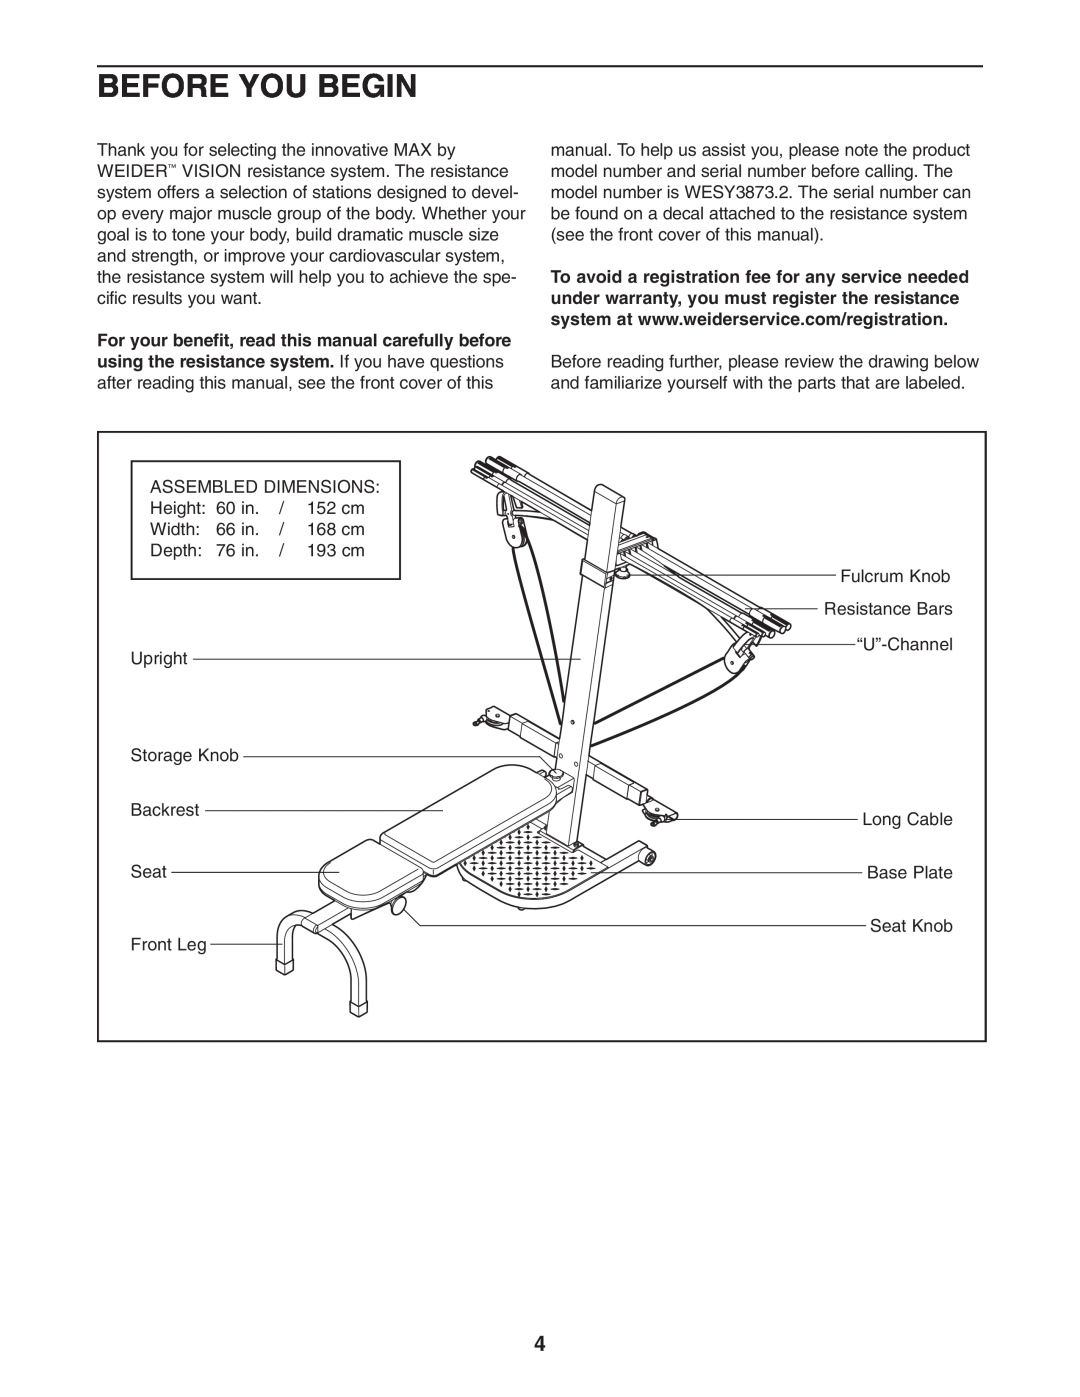 Weider WESY3873.2 user manual Before You Begin 